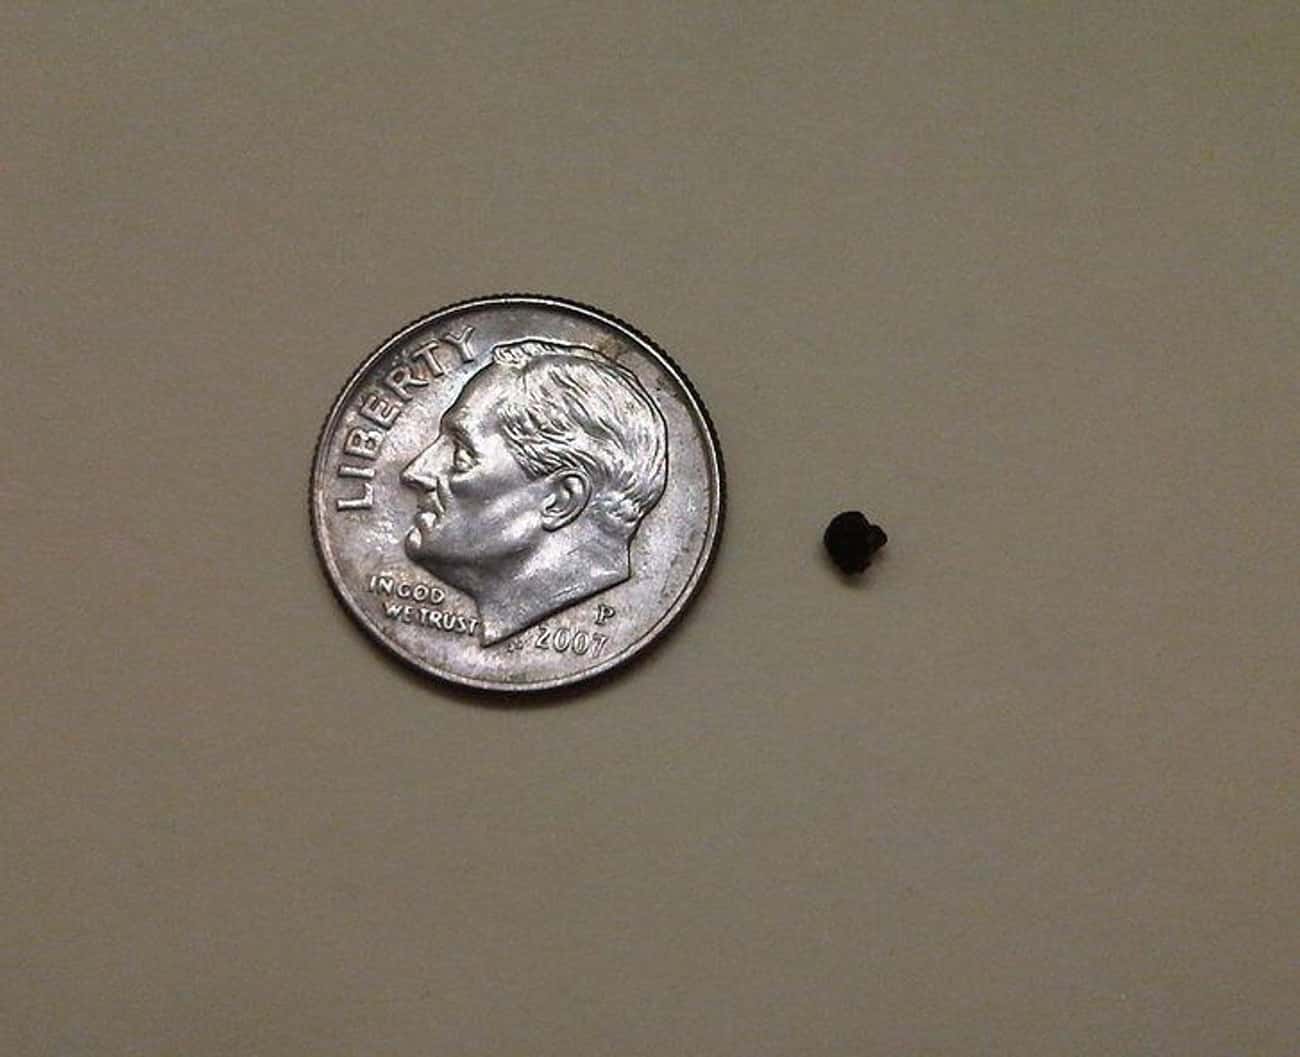 You May Have Small Kidney Stones Right Now